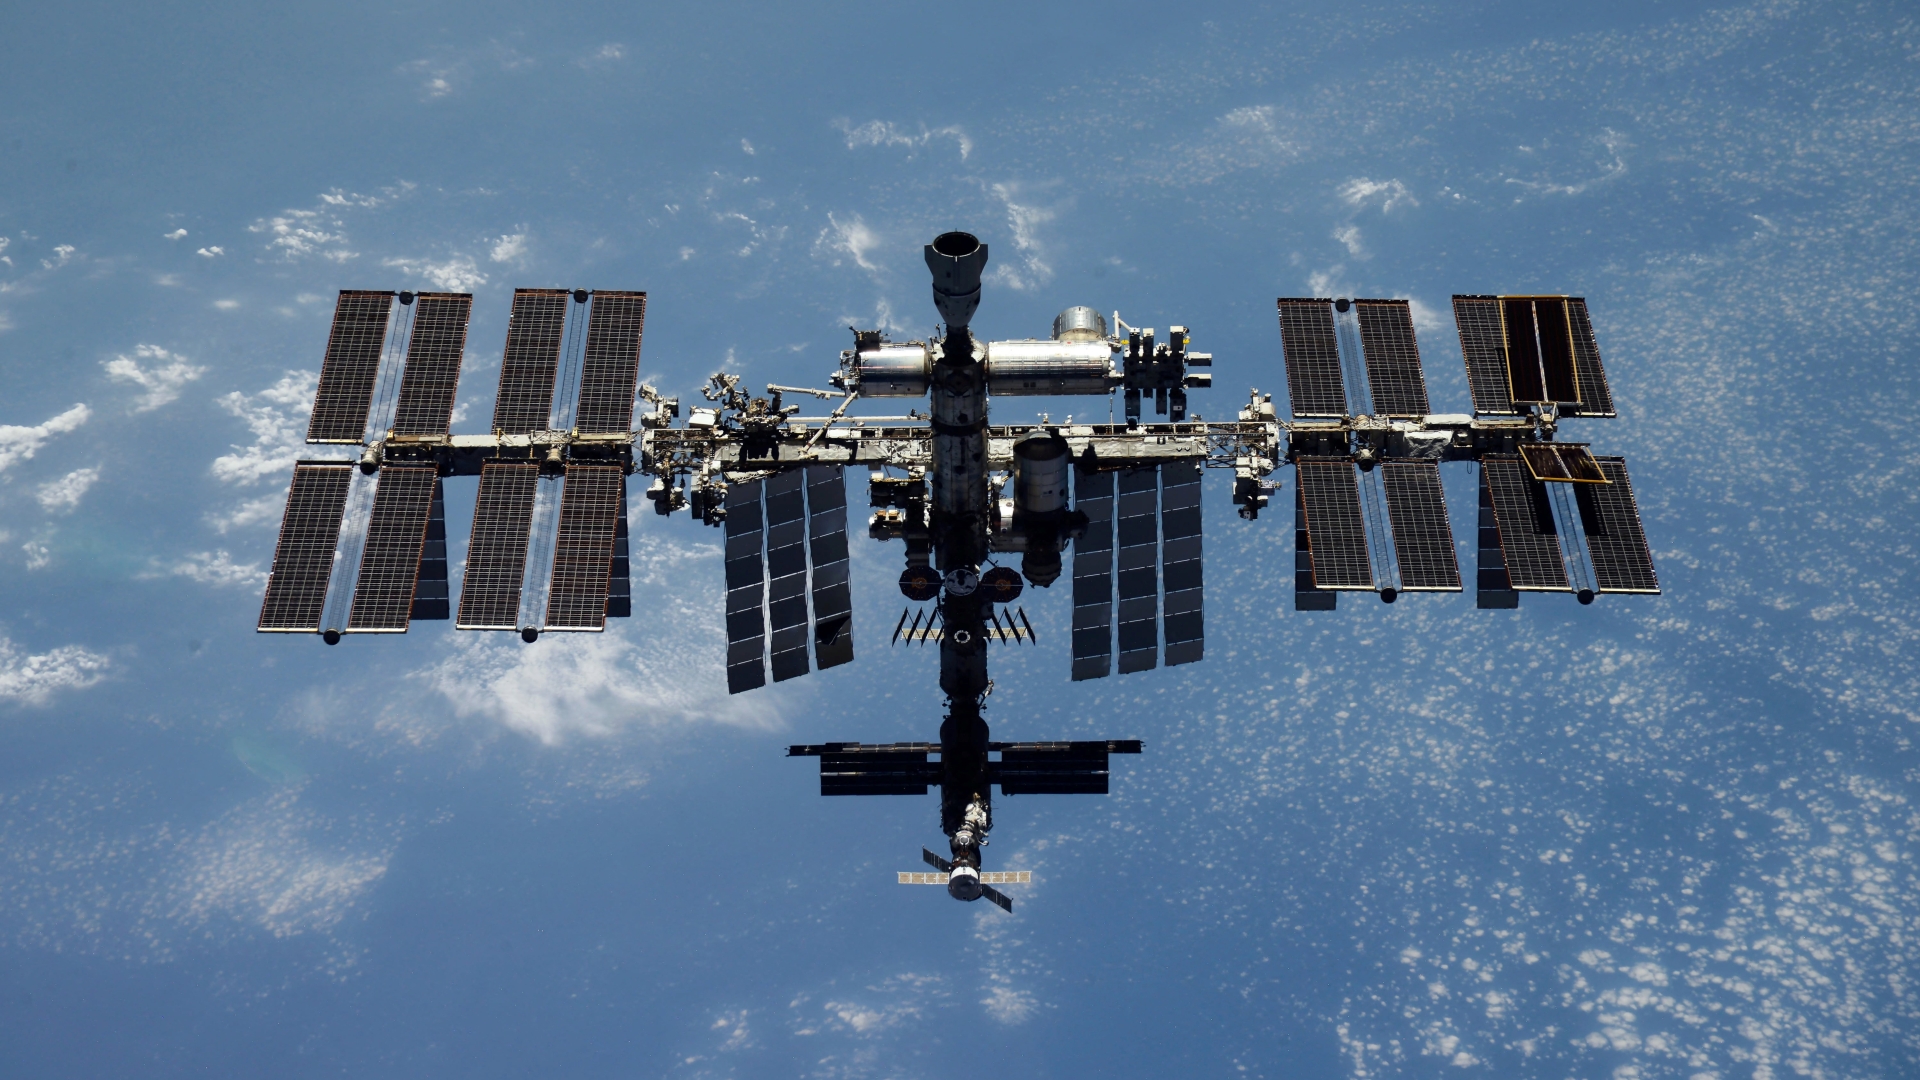 Satellite blown up by Russia forces Nasa to SWERVE the ISS to avoid debris